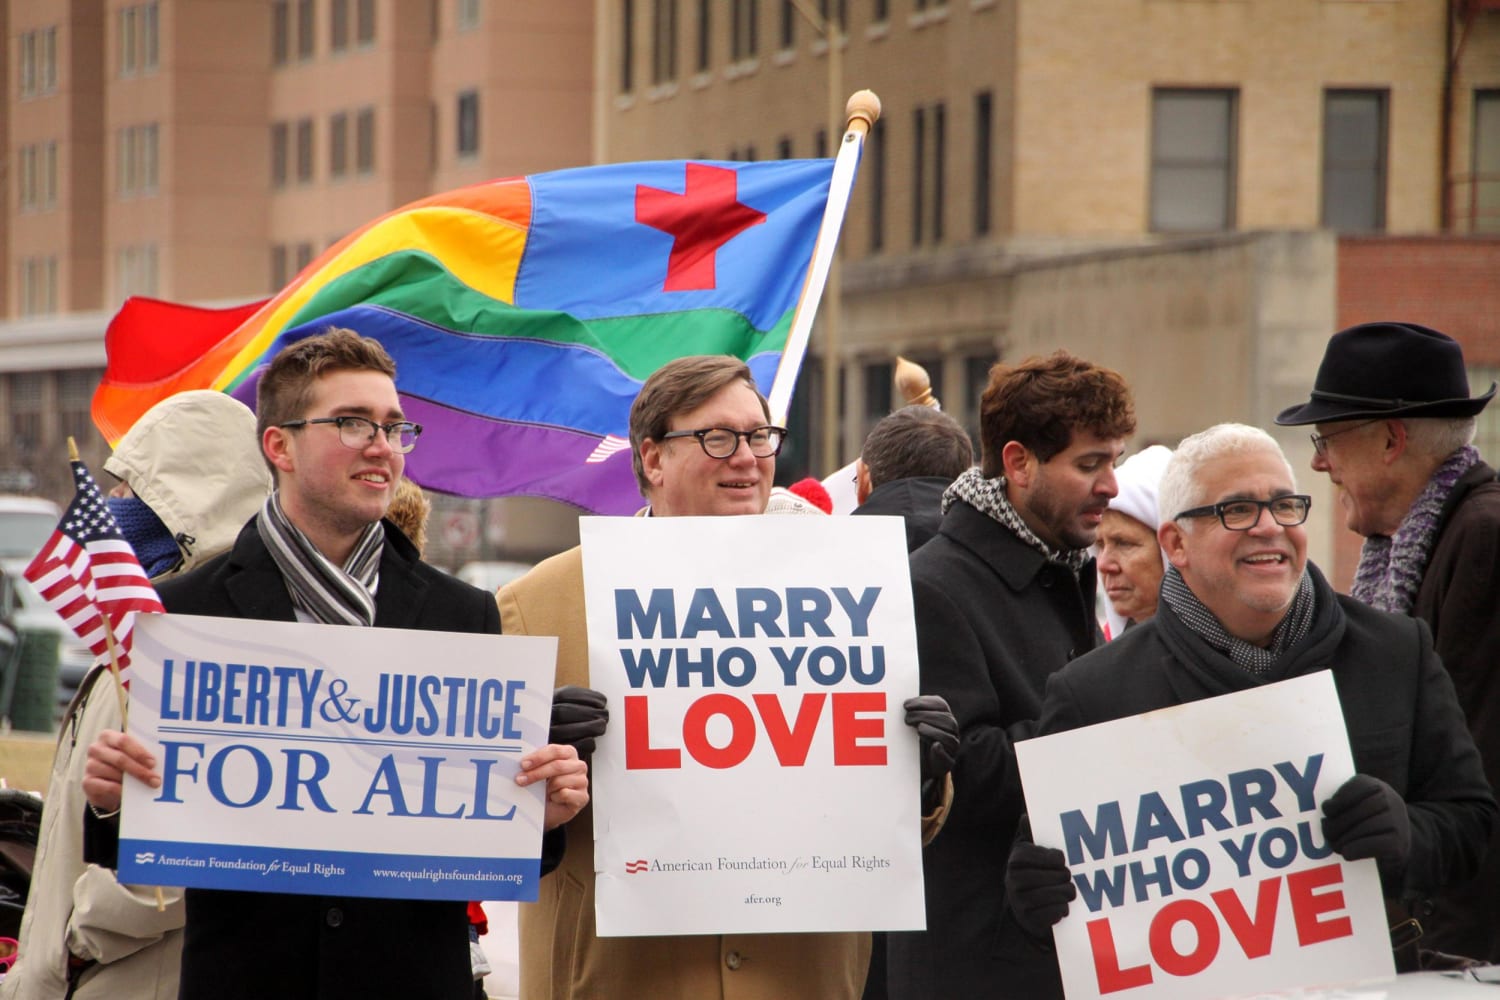 Ban on Same-Sex Marriage Struck Down in Virginia